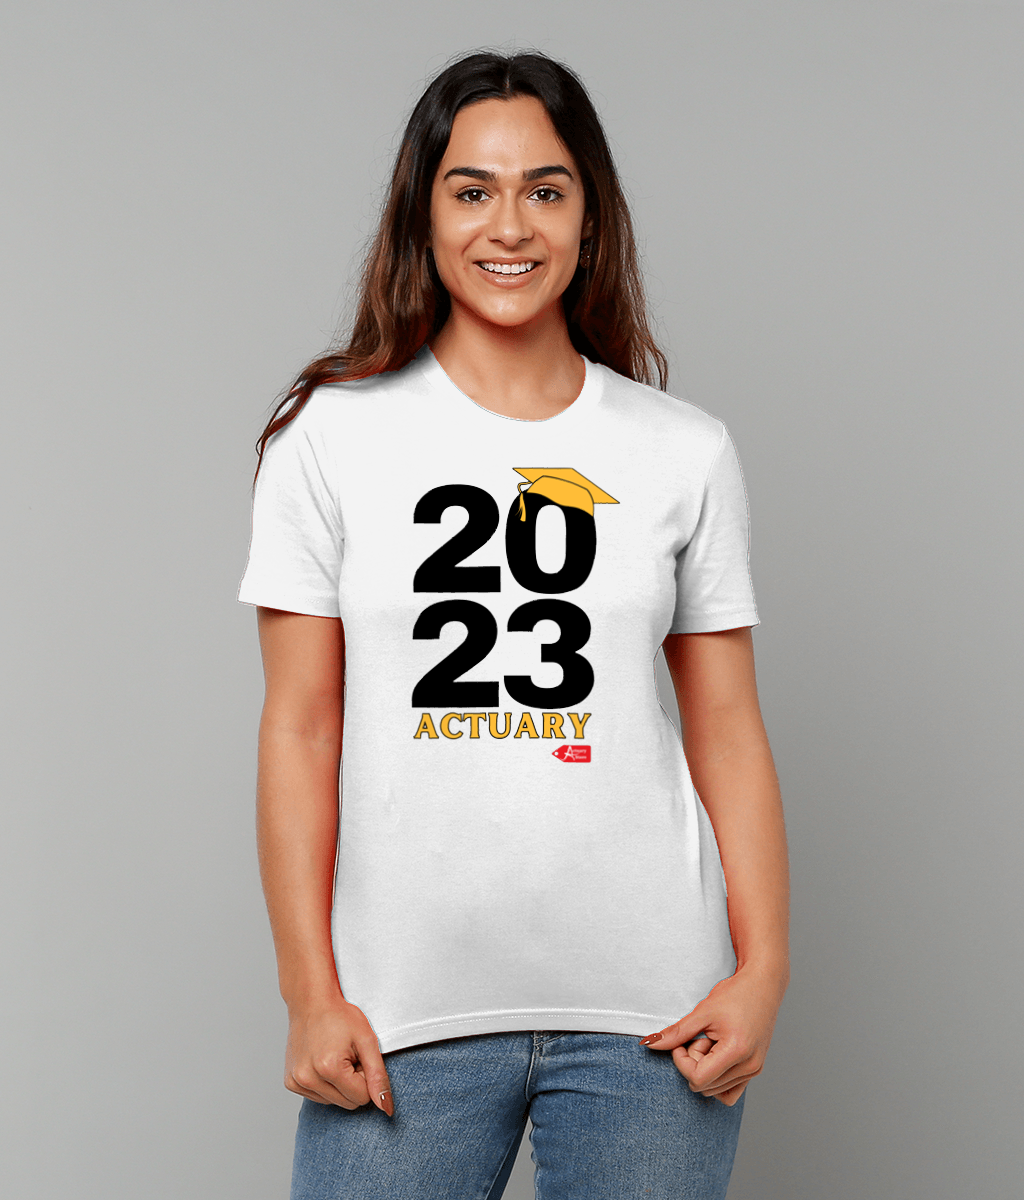 2023 Actuary Qualified White T-Shirt (Contact us to request for any other year)